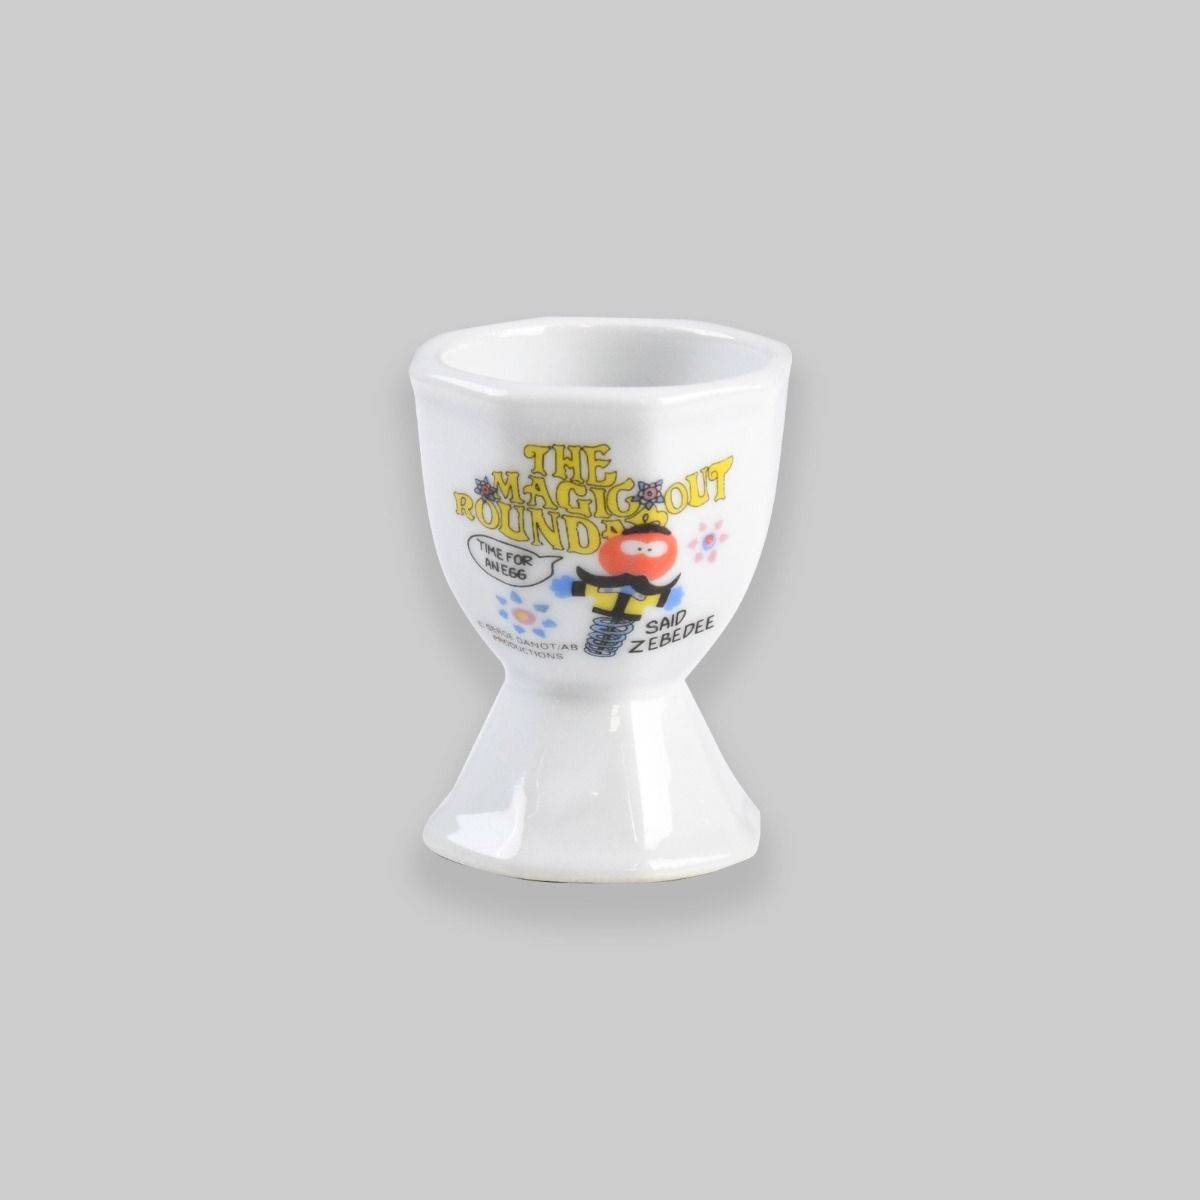 Vintage The Magic Roundabout Egg Cup